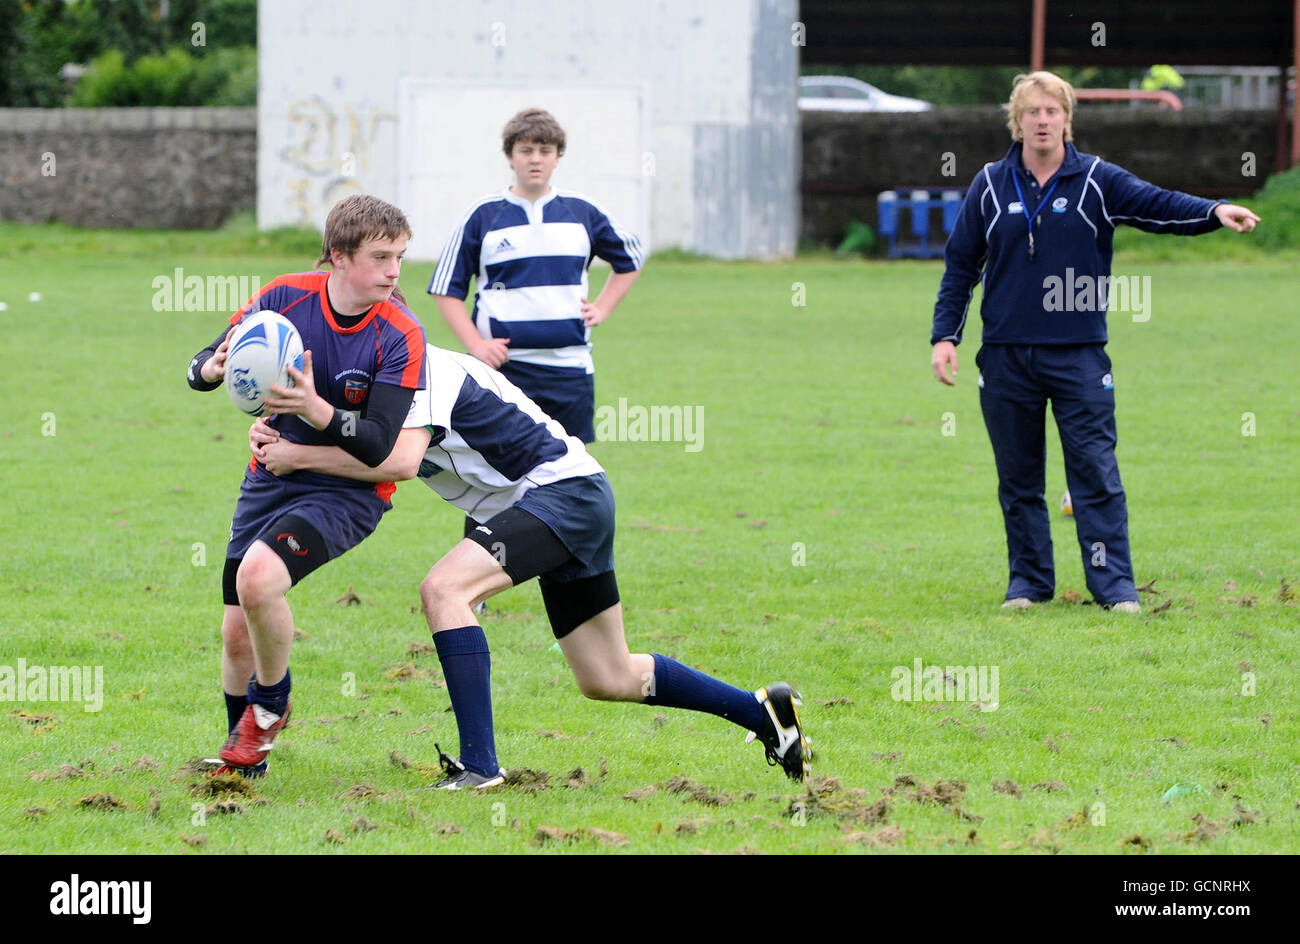 Rugby Union - Grampian School Rugby Goes for Gold - Aberdeen Grammar School Stock Photo